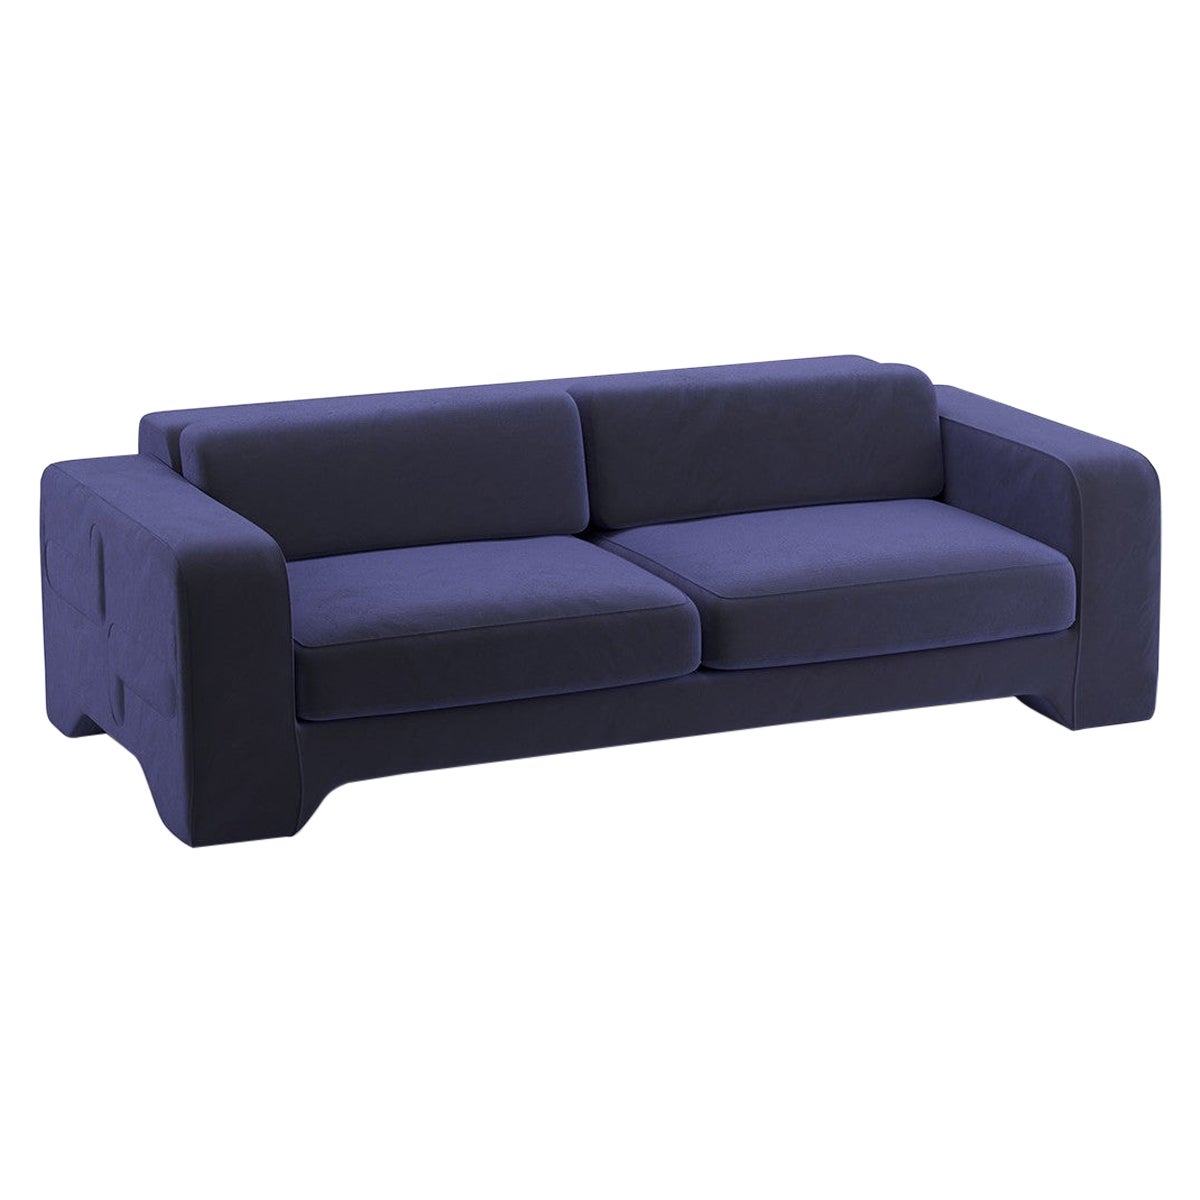 Popus Editions Giovanna 2.5 Seater Sofa in Marine Navy Como Velvet Upholstery For Sale